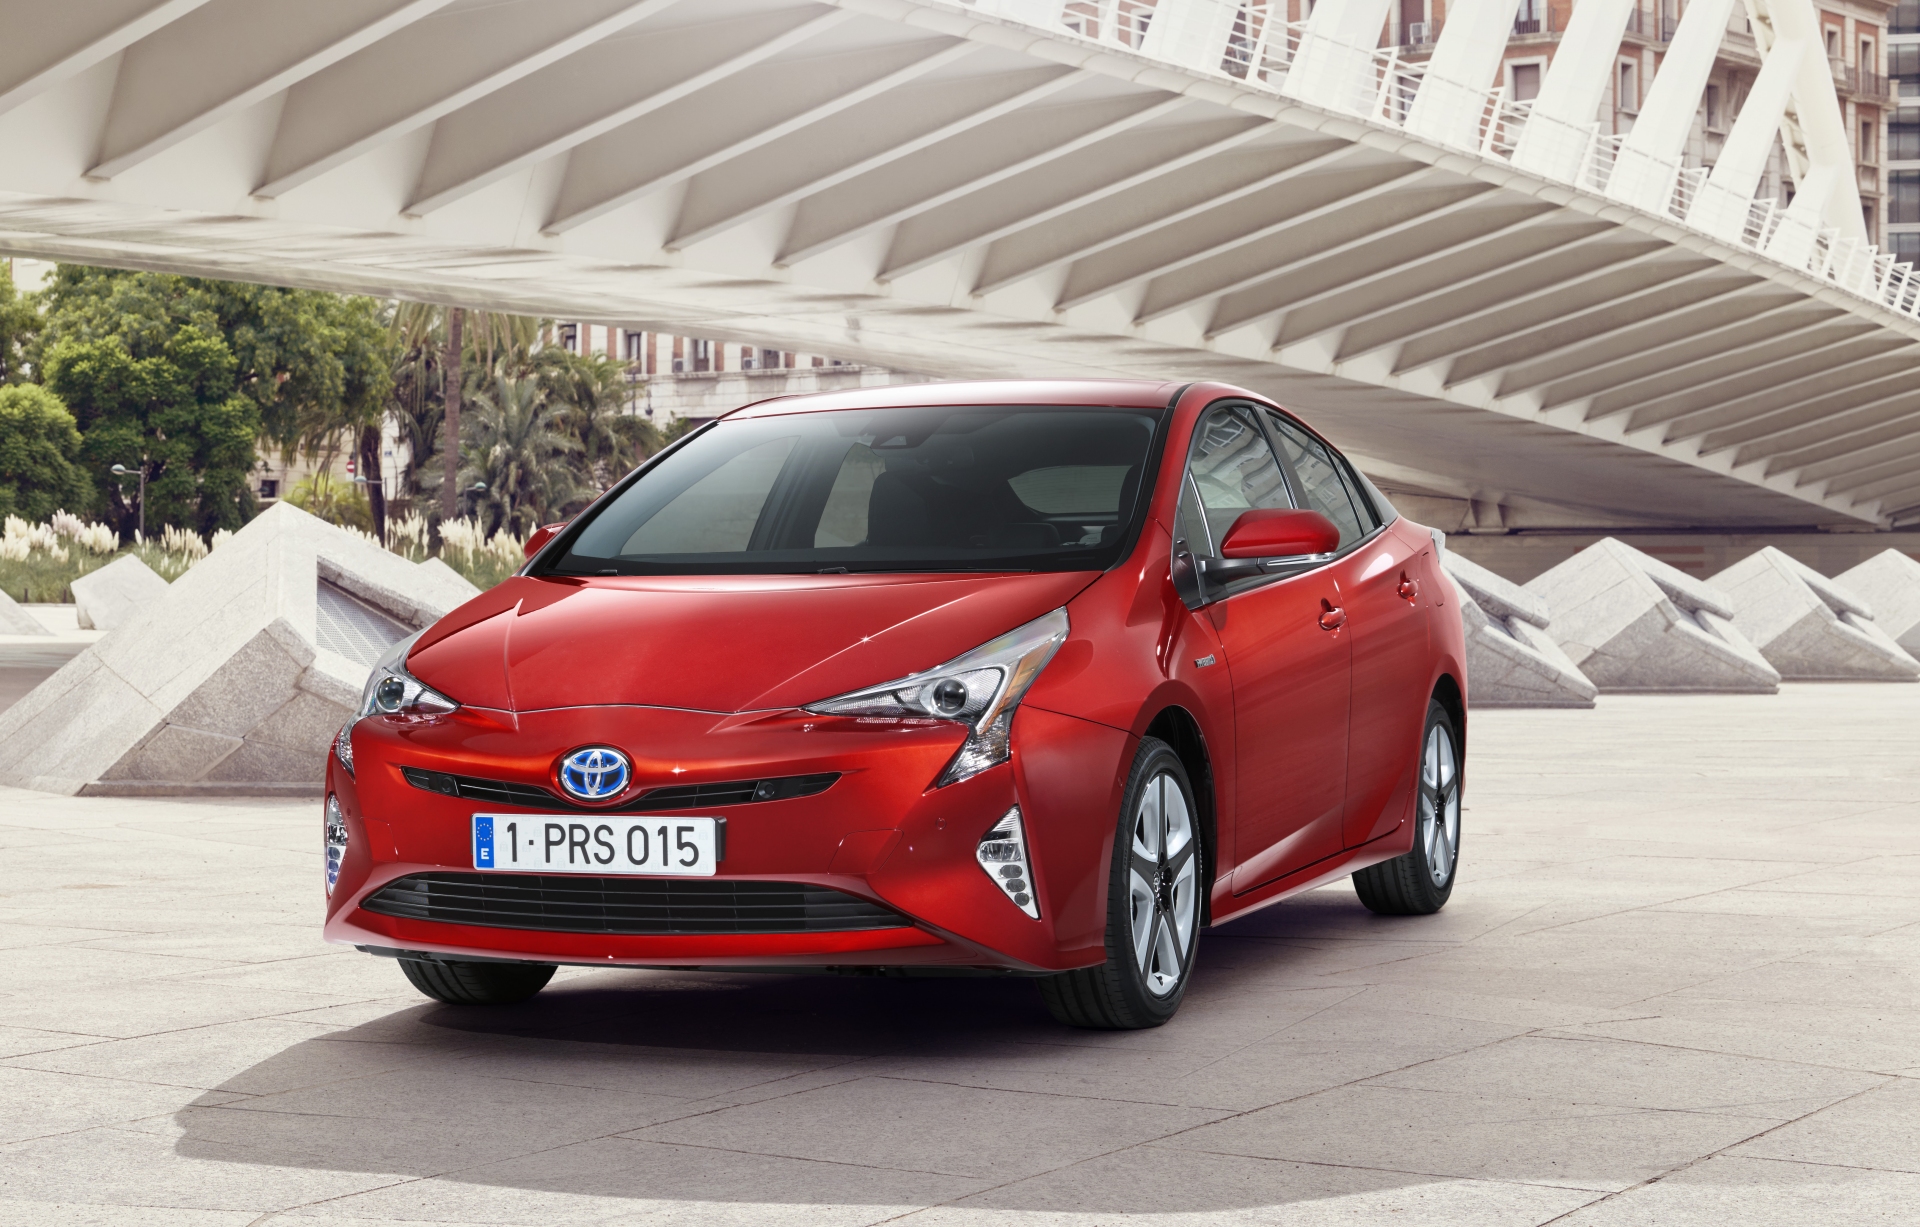 Toyota Prius - Red Exterior - Front Side View - Green Machine | A Closer Look At Electric Cars And Hybrid Vehicles